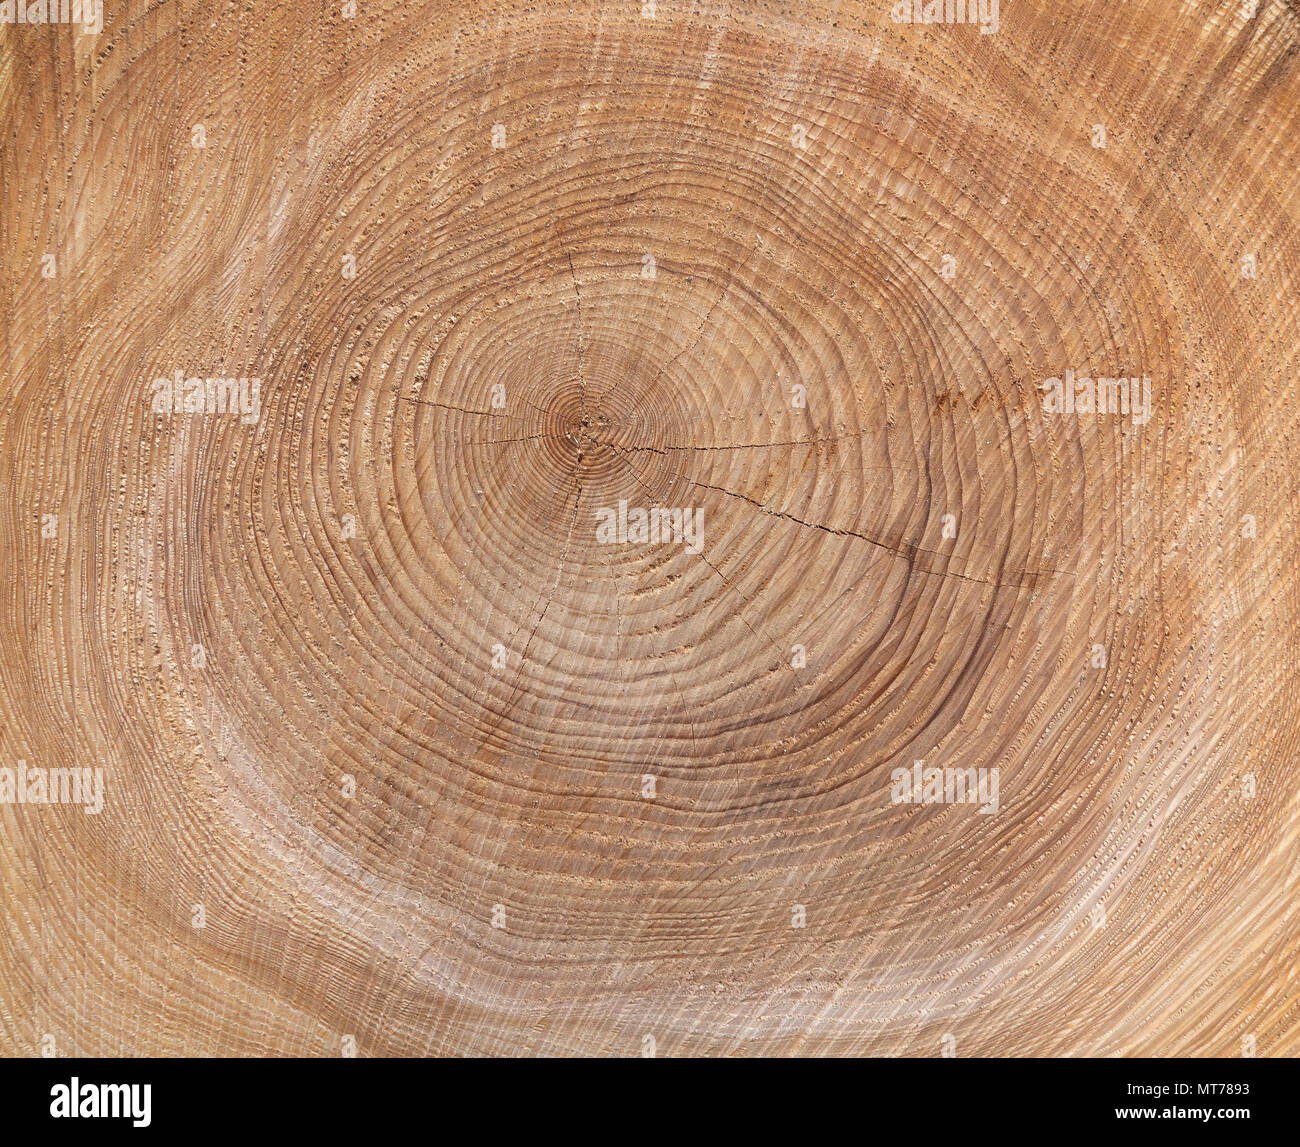 Texture of the annual rings of a tree Stock Photo